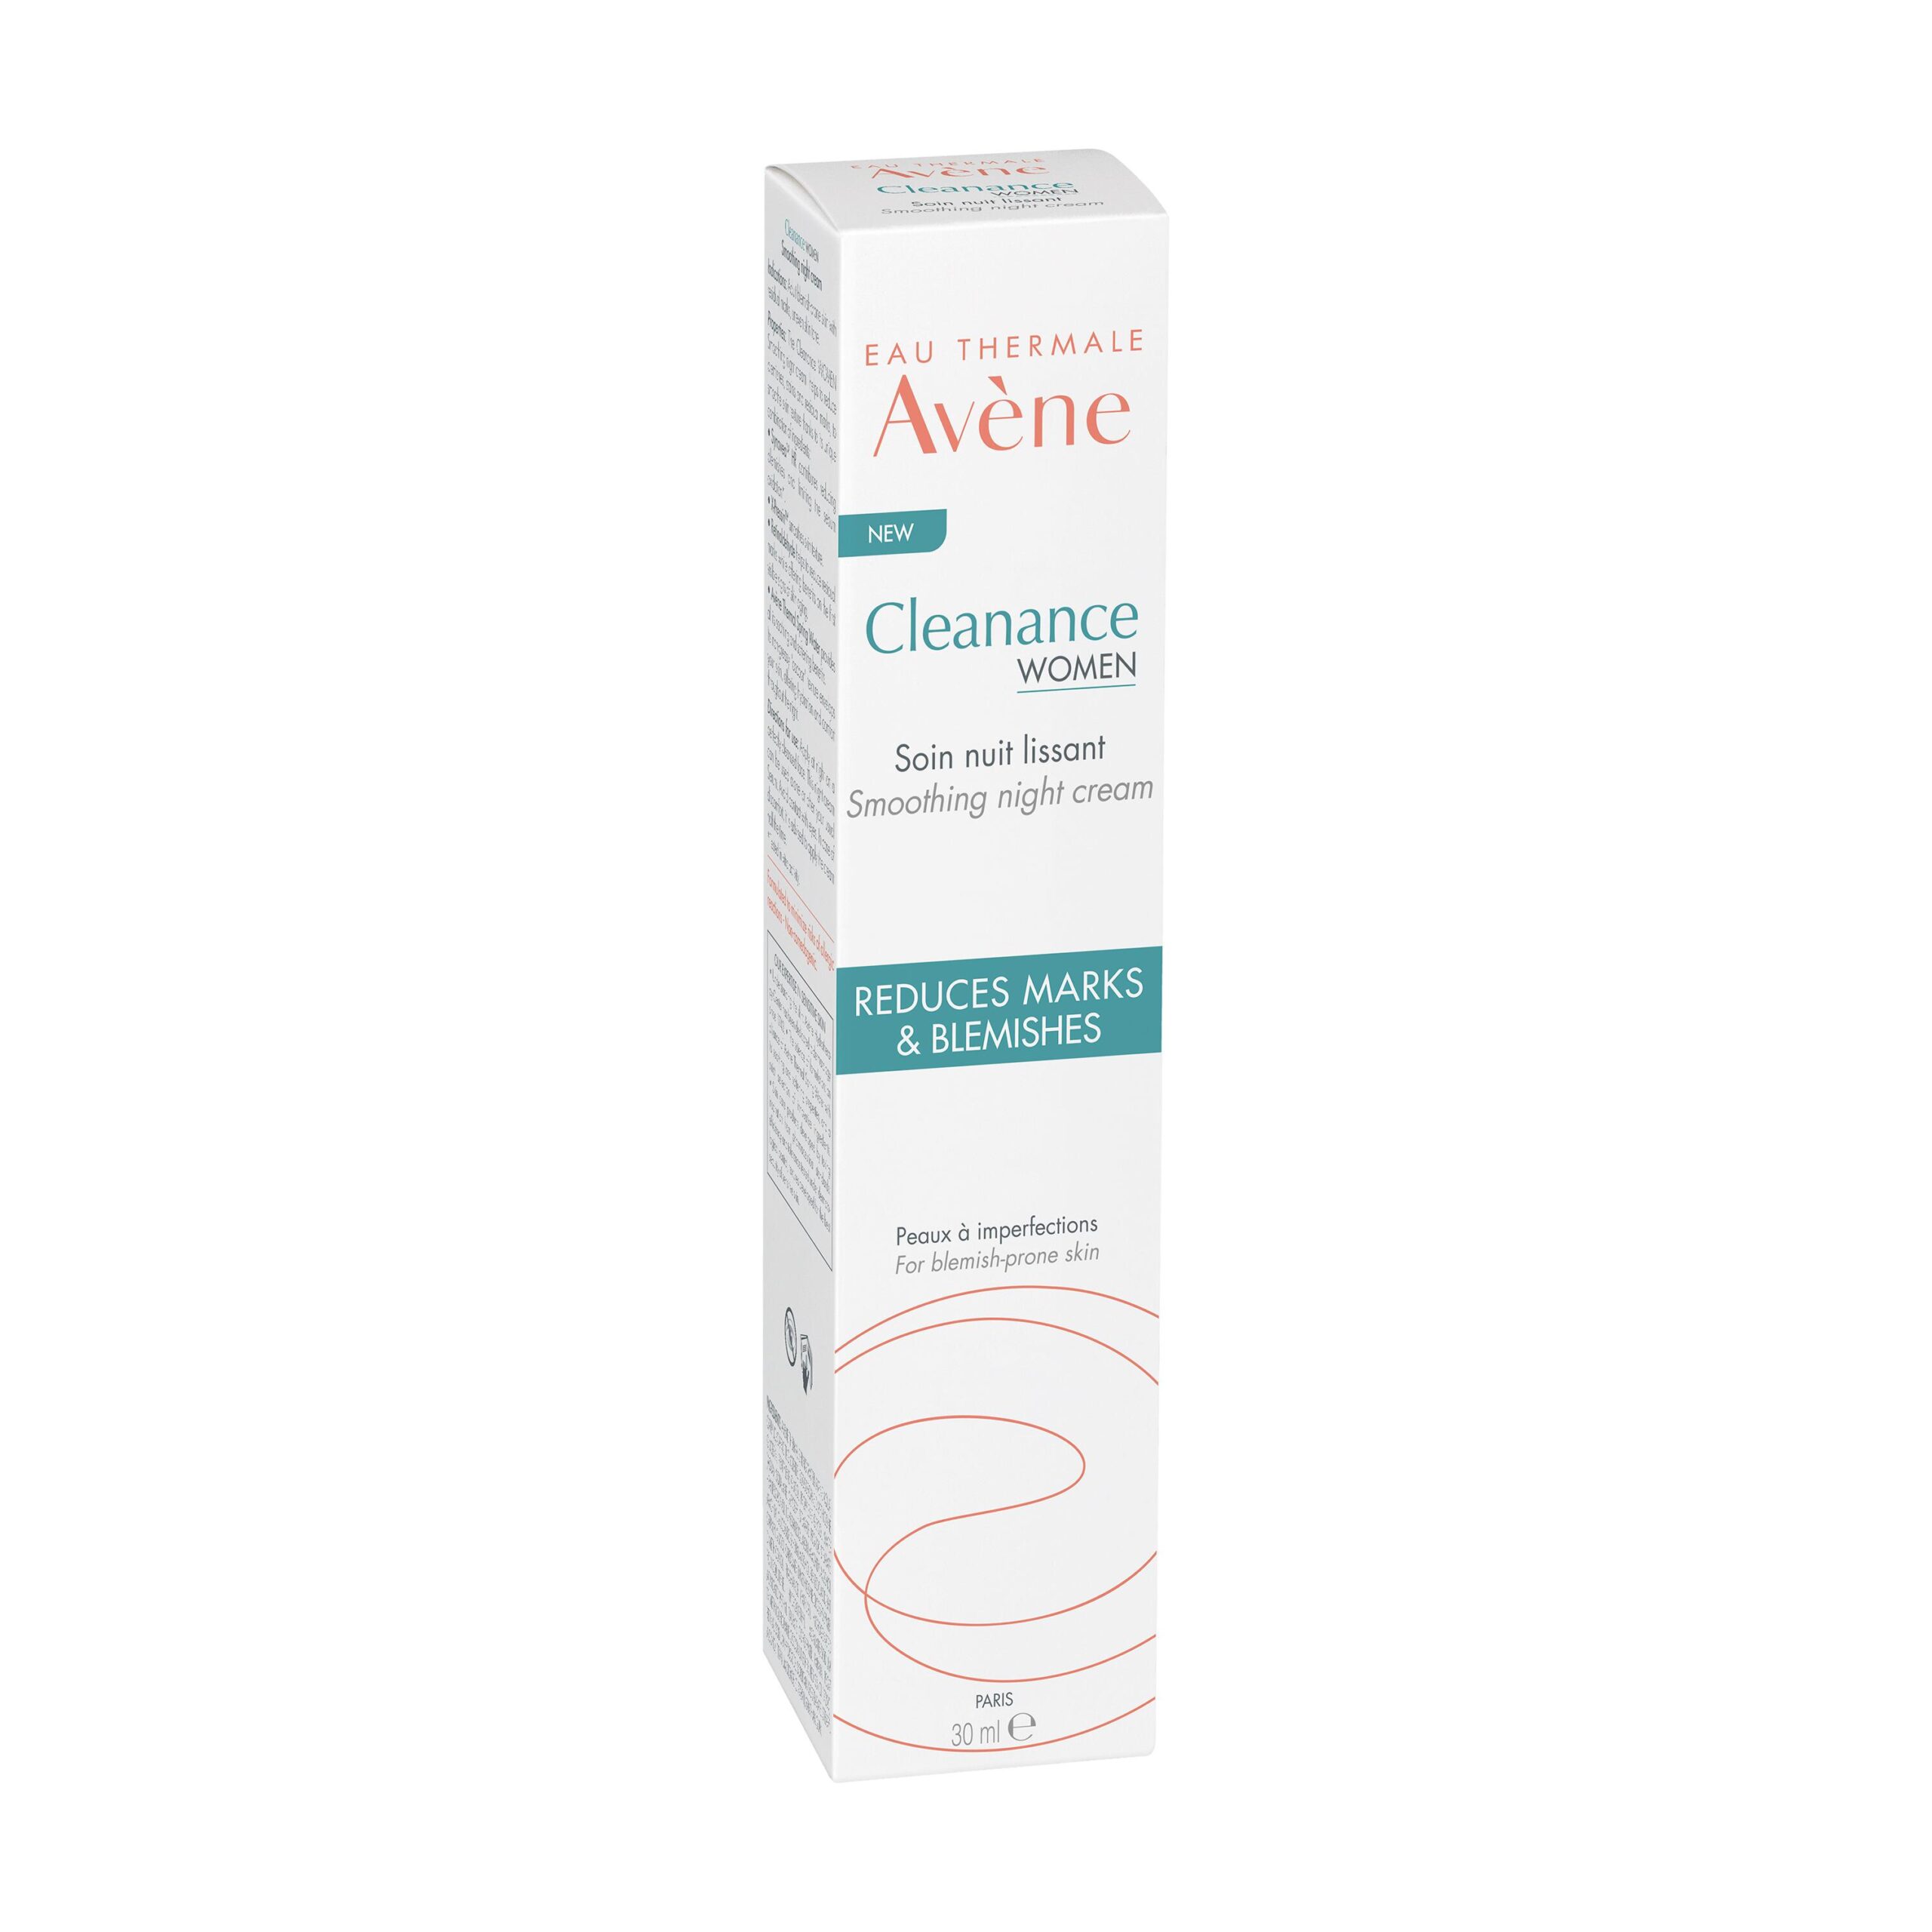 Smoothing Night Cream  Cleanance WOMEN, assisting blemish-prone